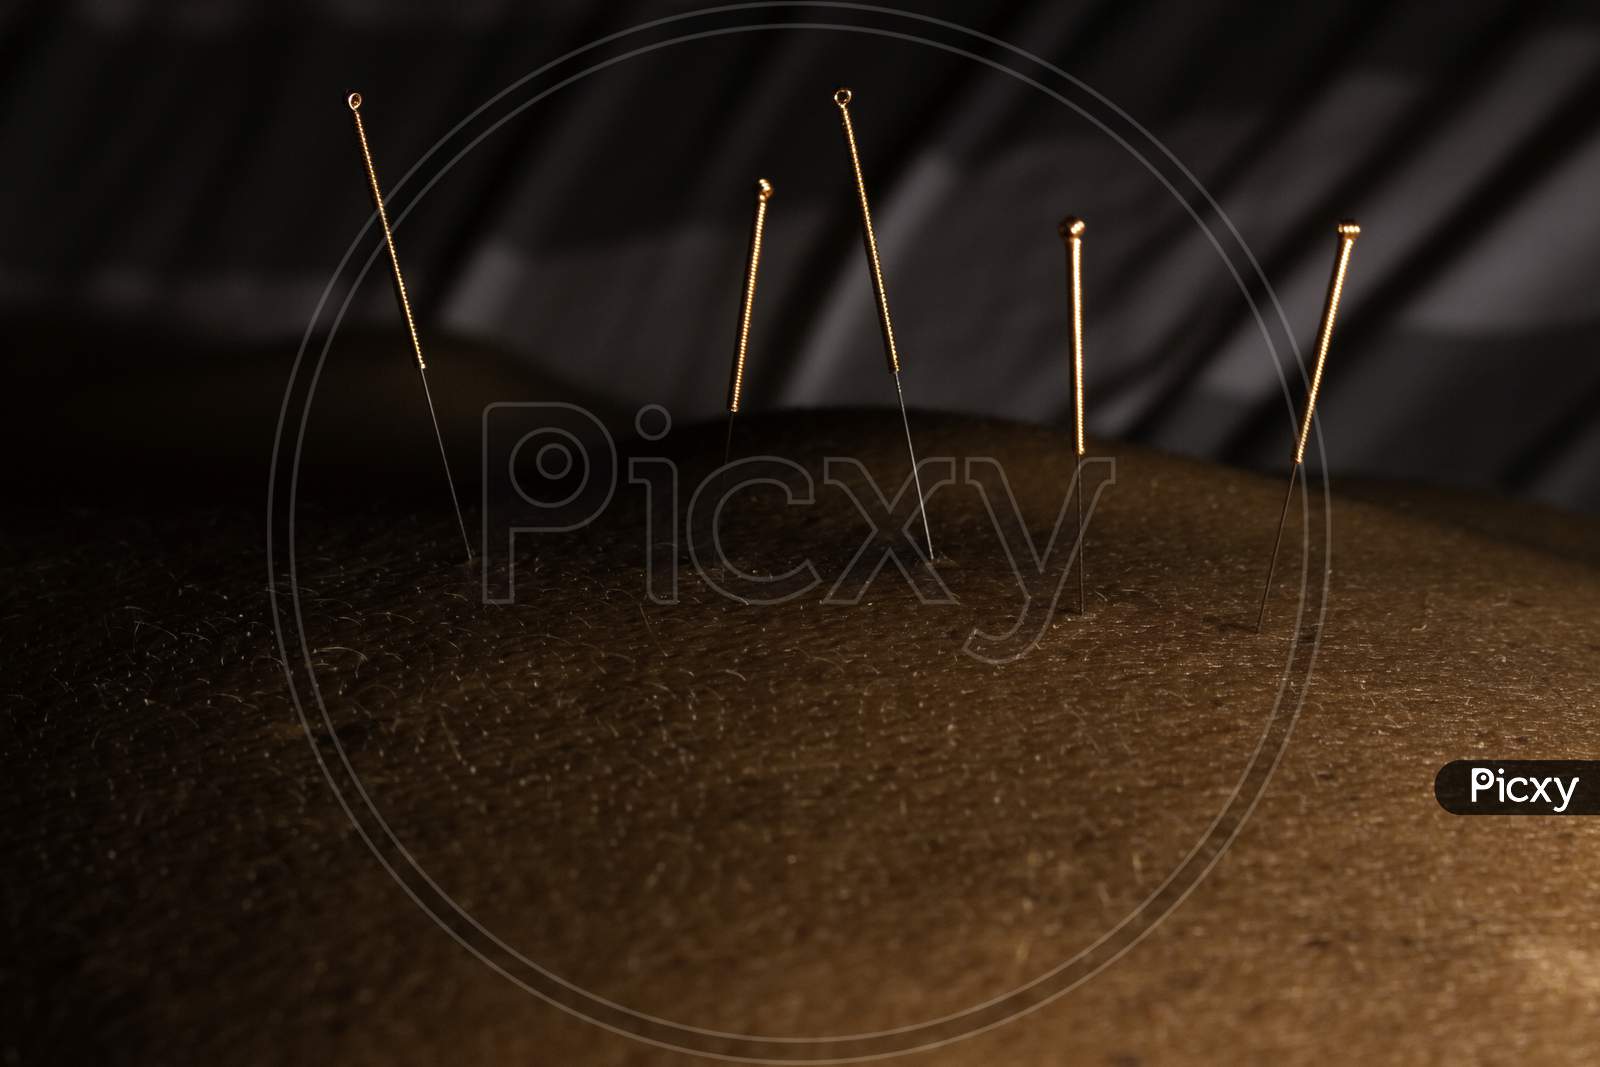 Acupuncture Needles For Treatment Using Chinese Medicine. Acupuncture On The Back For Pain In The Lumbar Region.